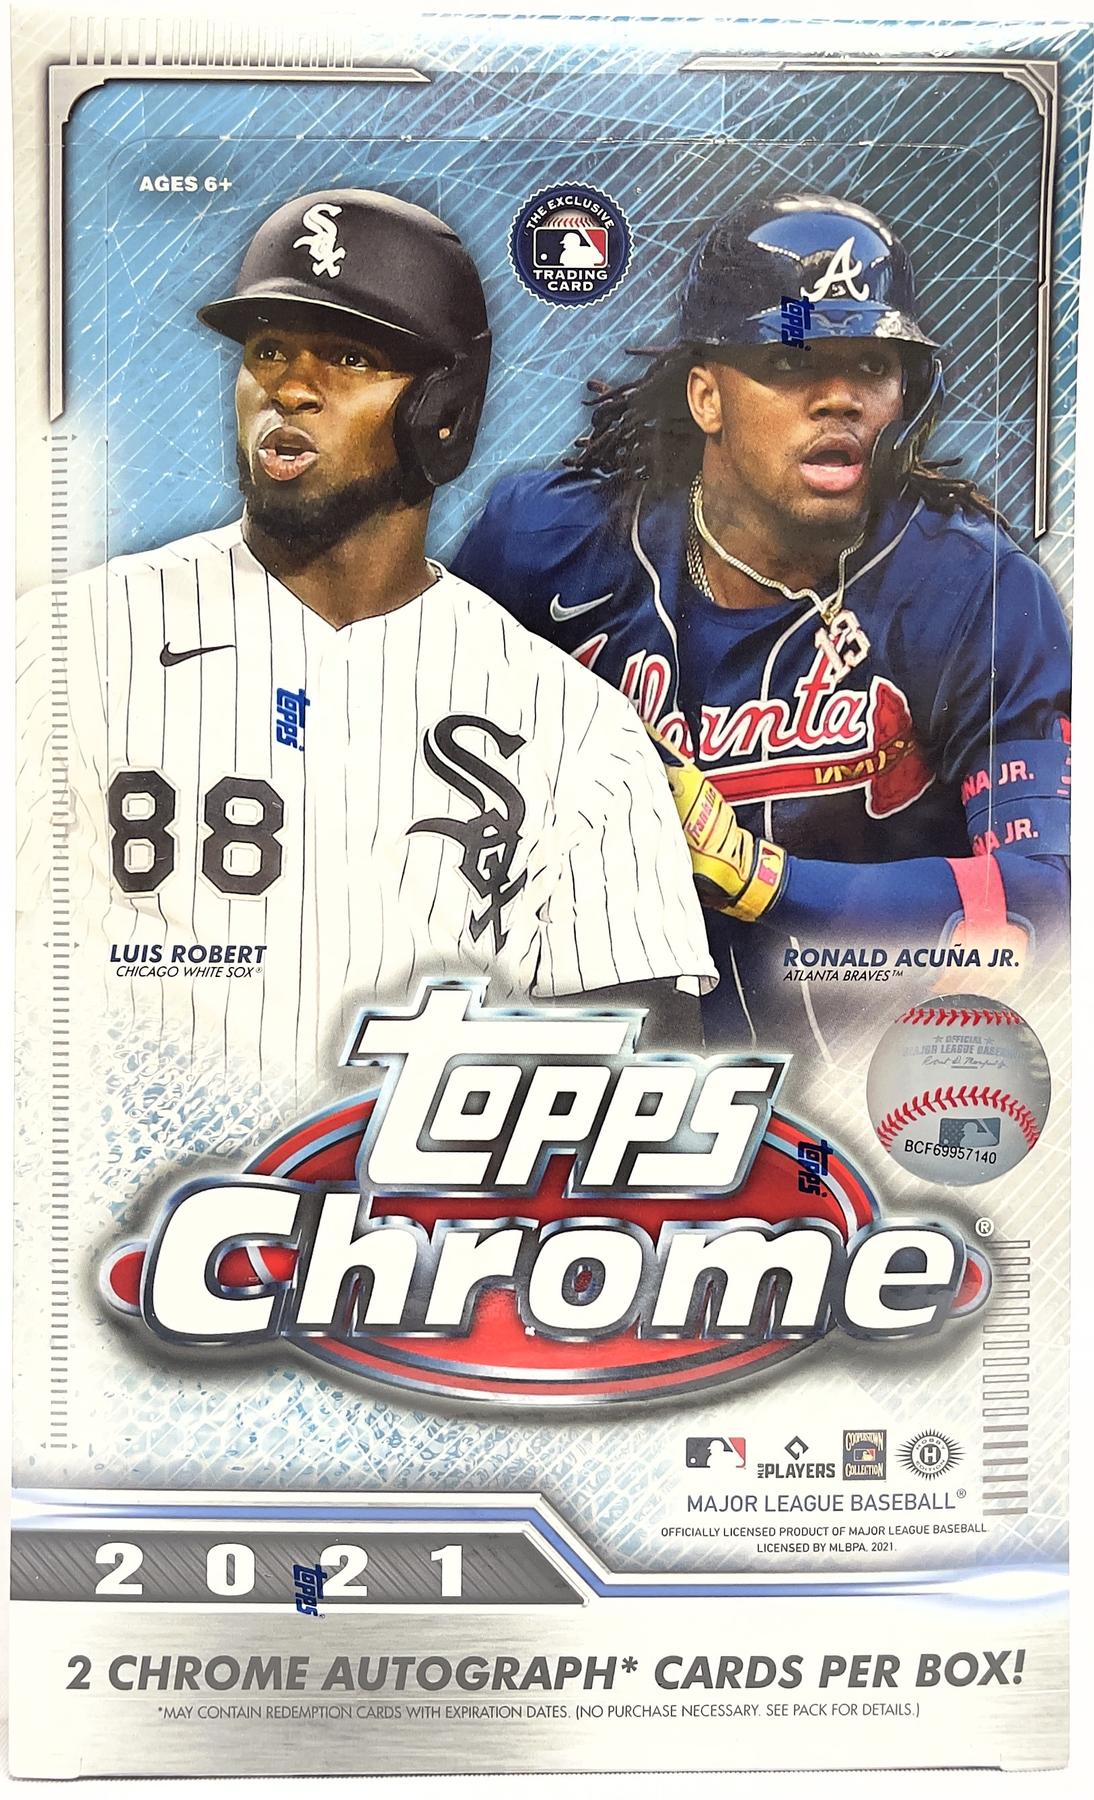 2017 TOPPS CHROME BLACK & WHITE NEGATIVE REFRACTOR COMPLETE YOUR SET. 